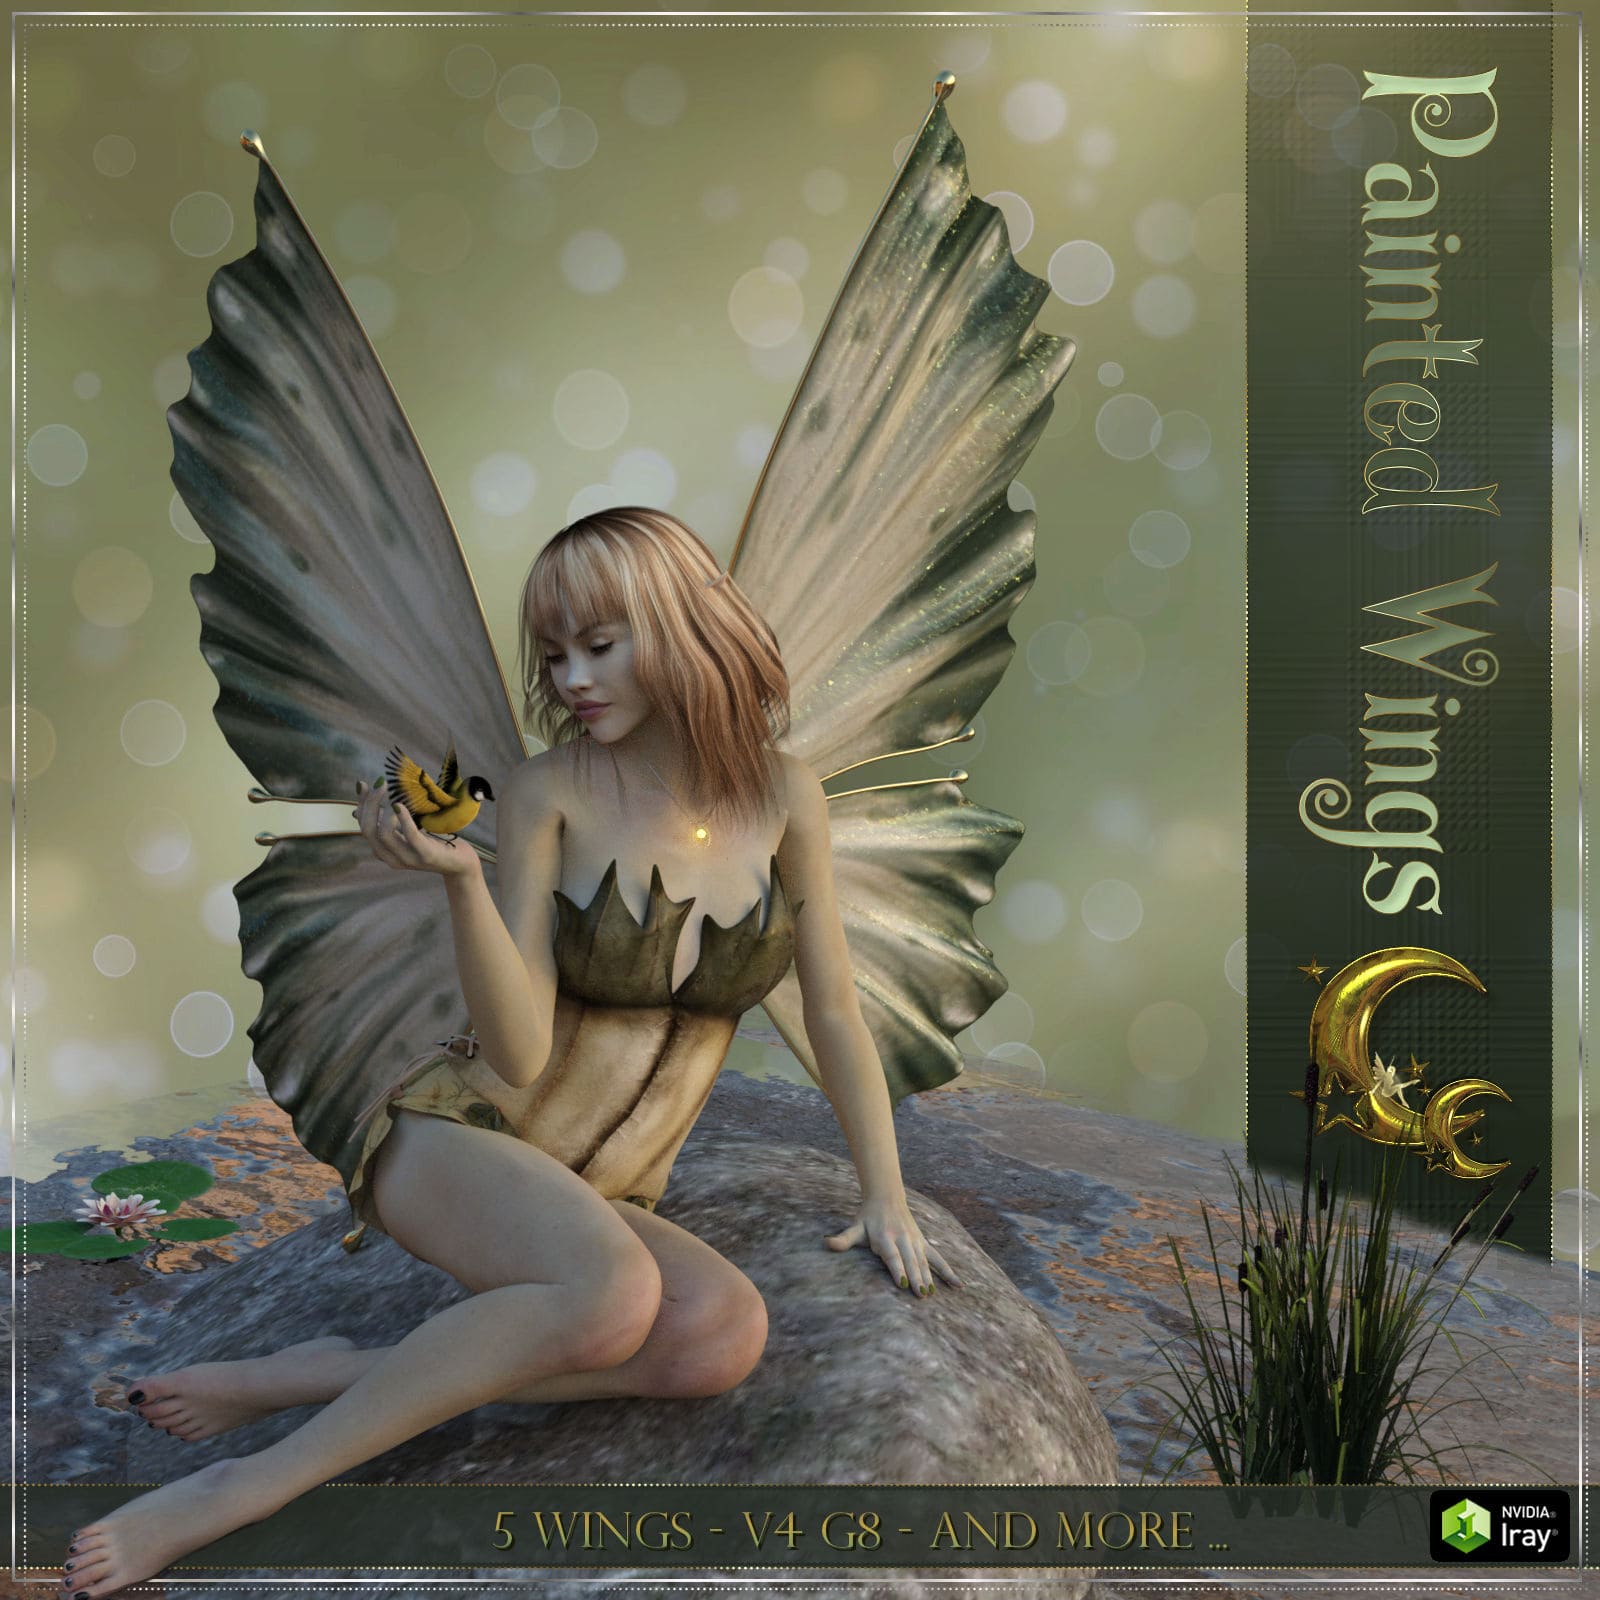 Painted Wings For DAZ and V4-G8 and more_DAZ3D下载站